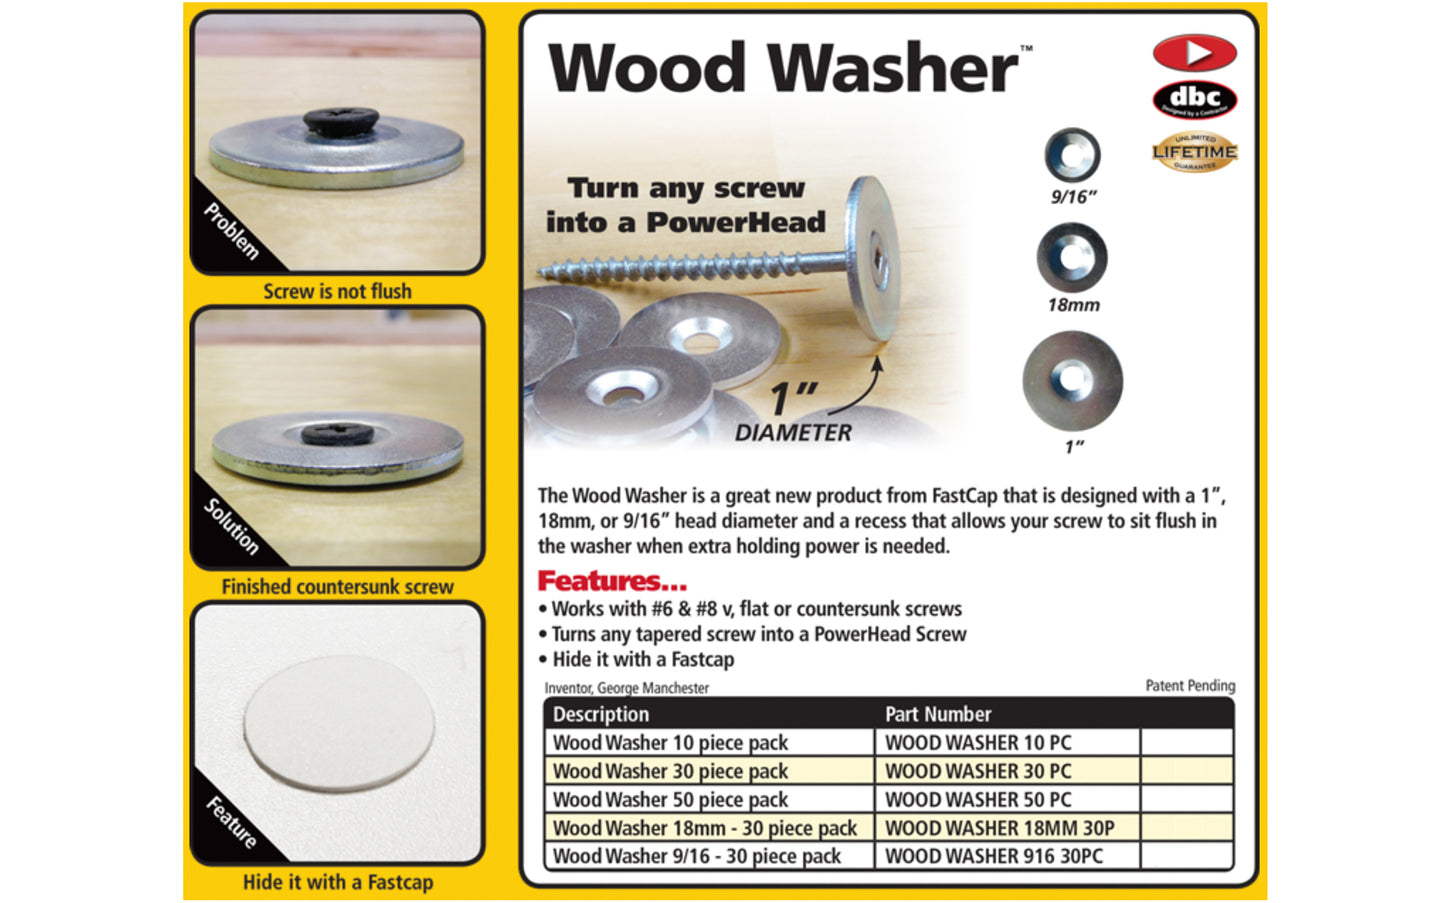 FastCap Wood Washer 1" Diameter - 30 Pack ~ Countersunk Washers - Model No. WOOD WASHER 30PC